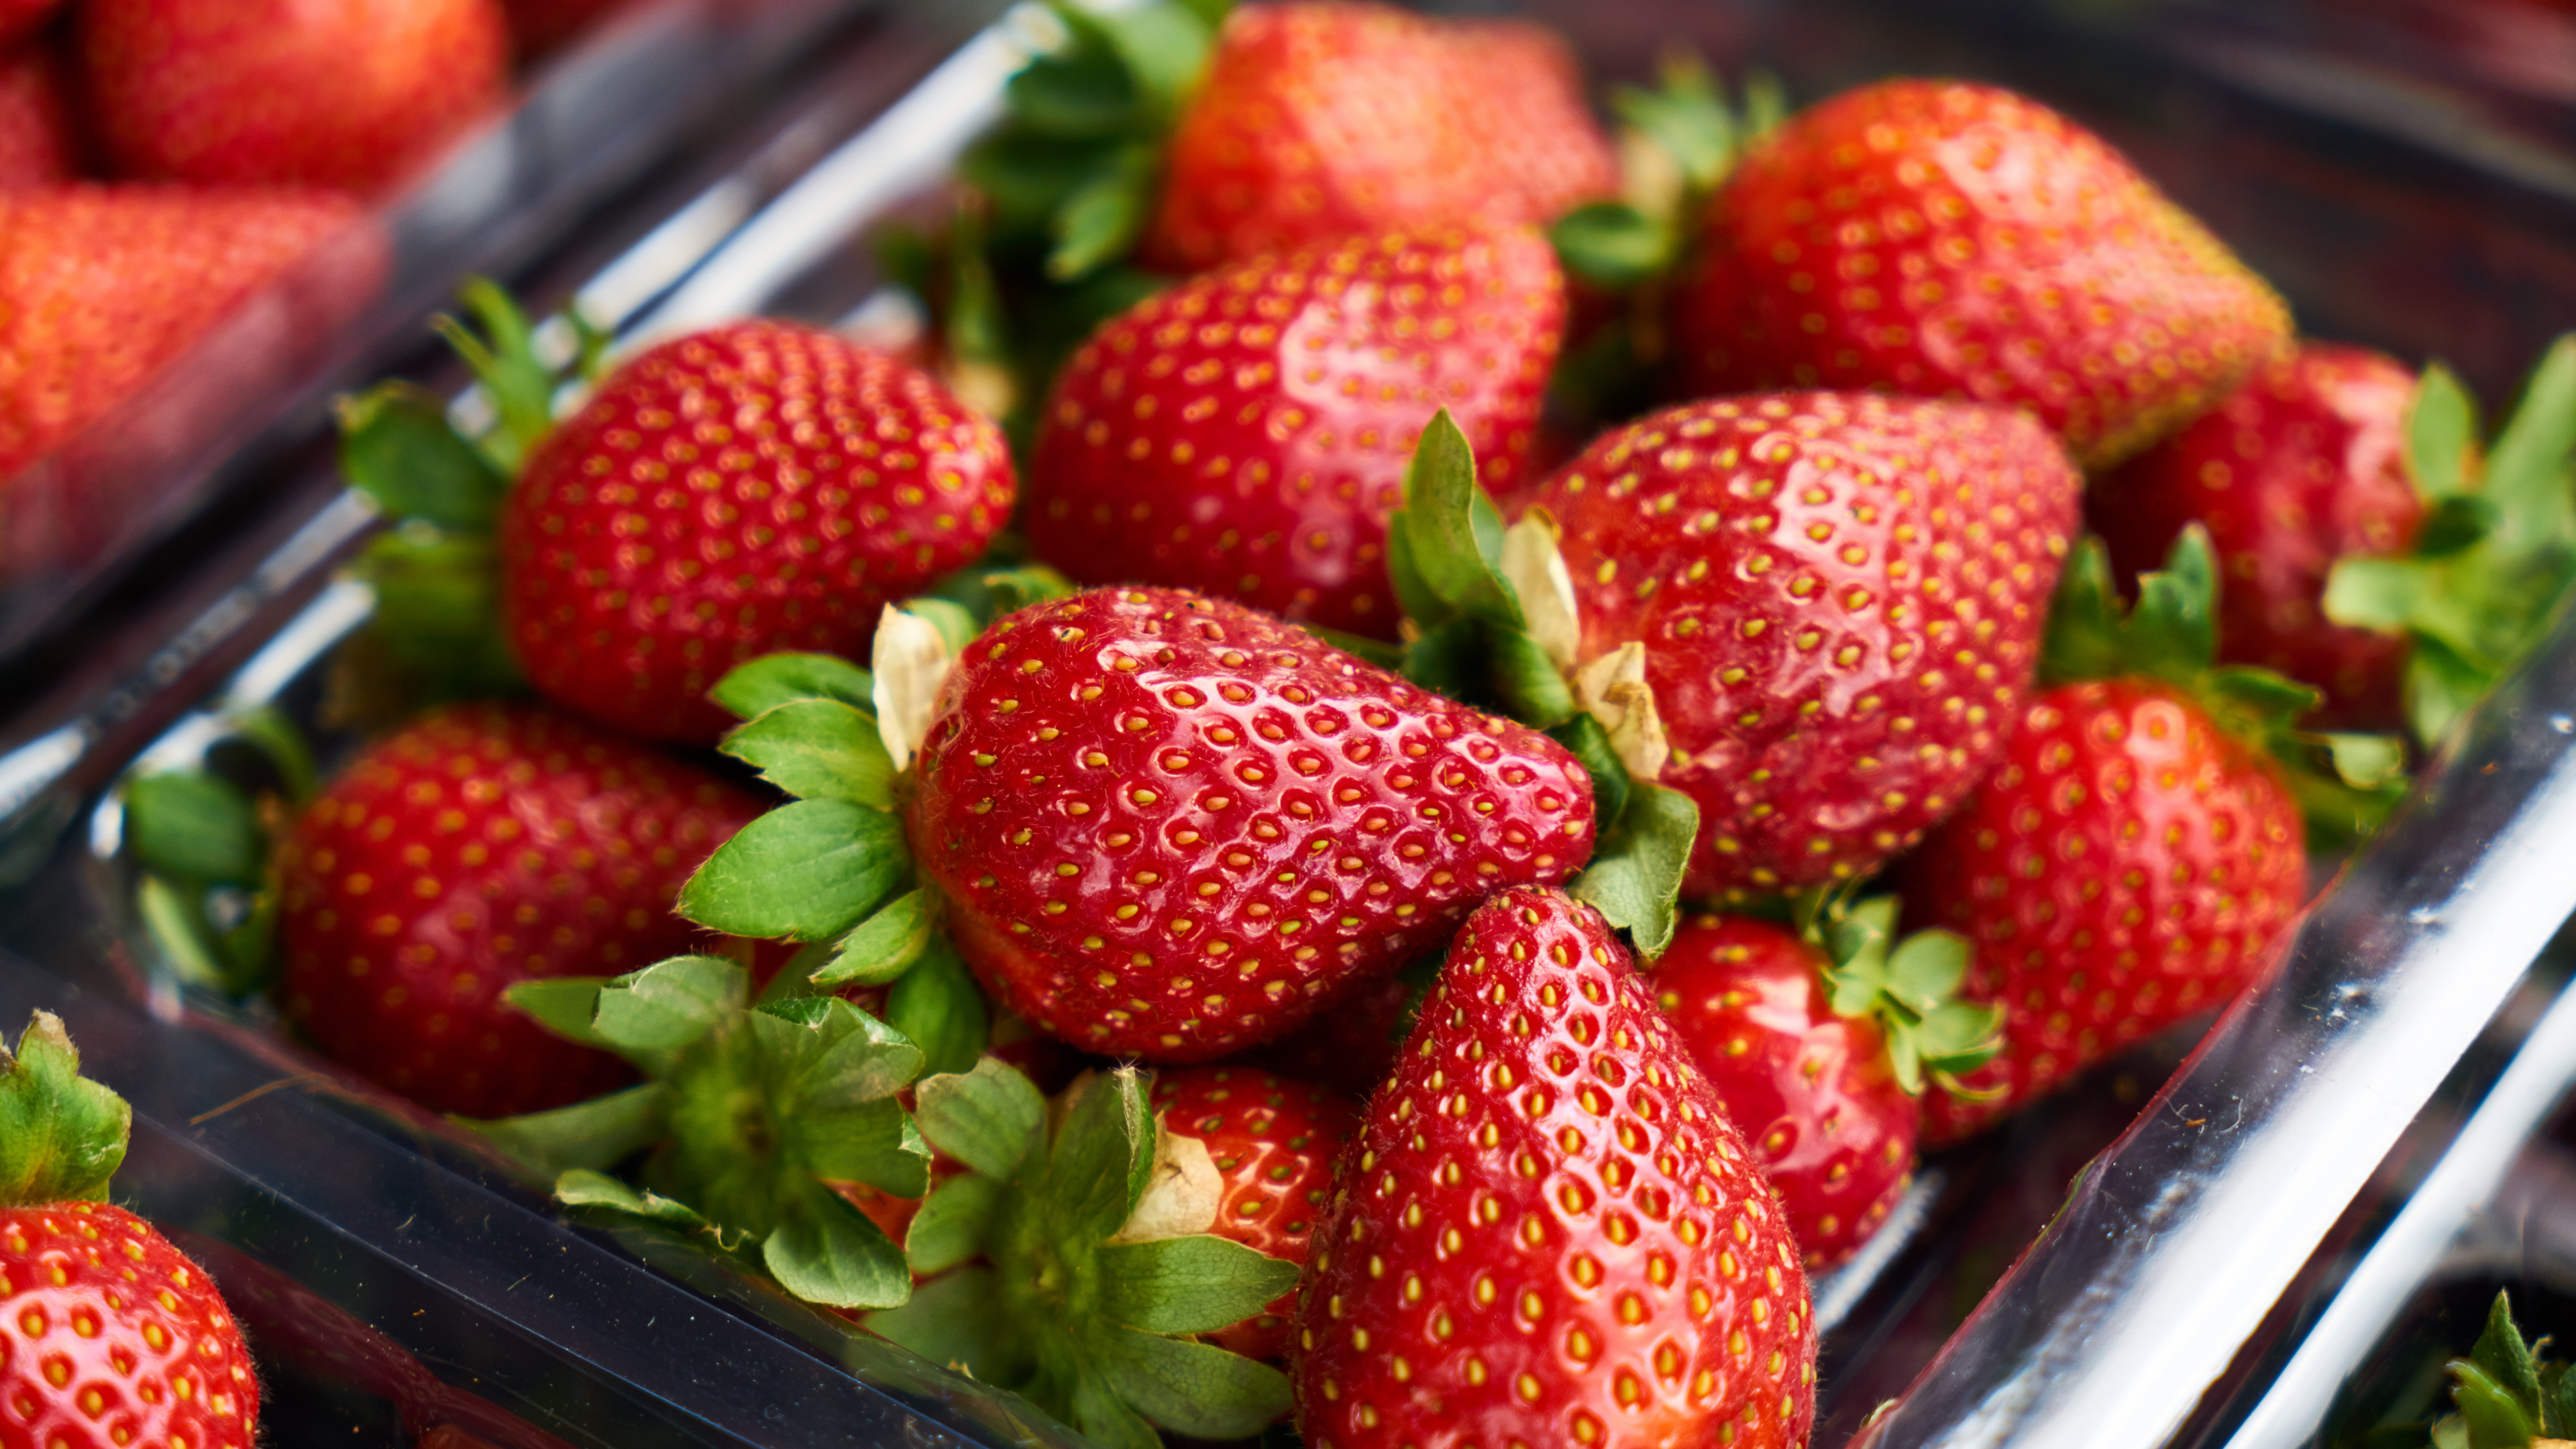 Strawberries on Stainless Steel Tray. Wallpaper in 3840x2160 Resolution